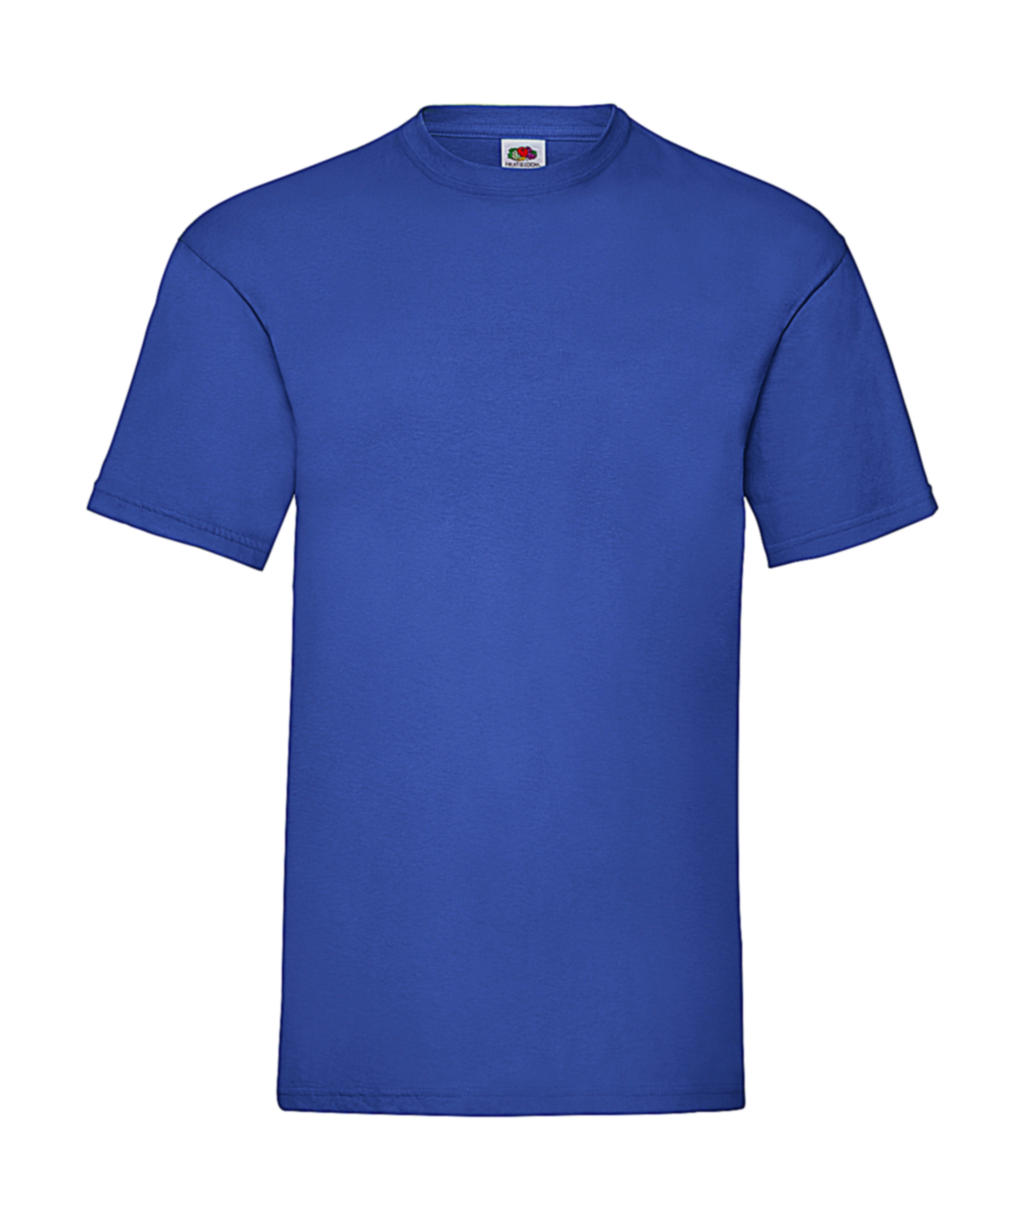  Valueweight Tee in Farbe Royal